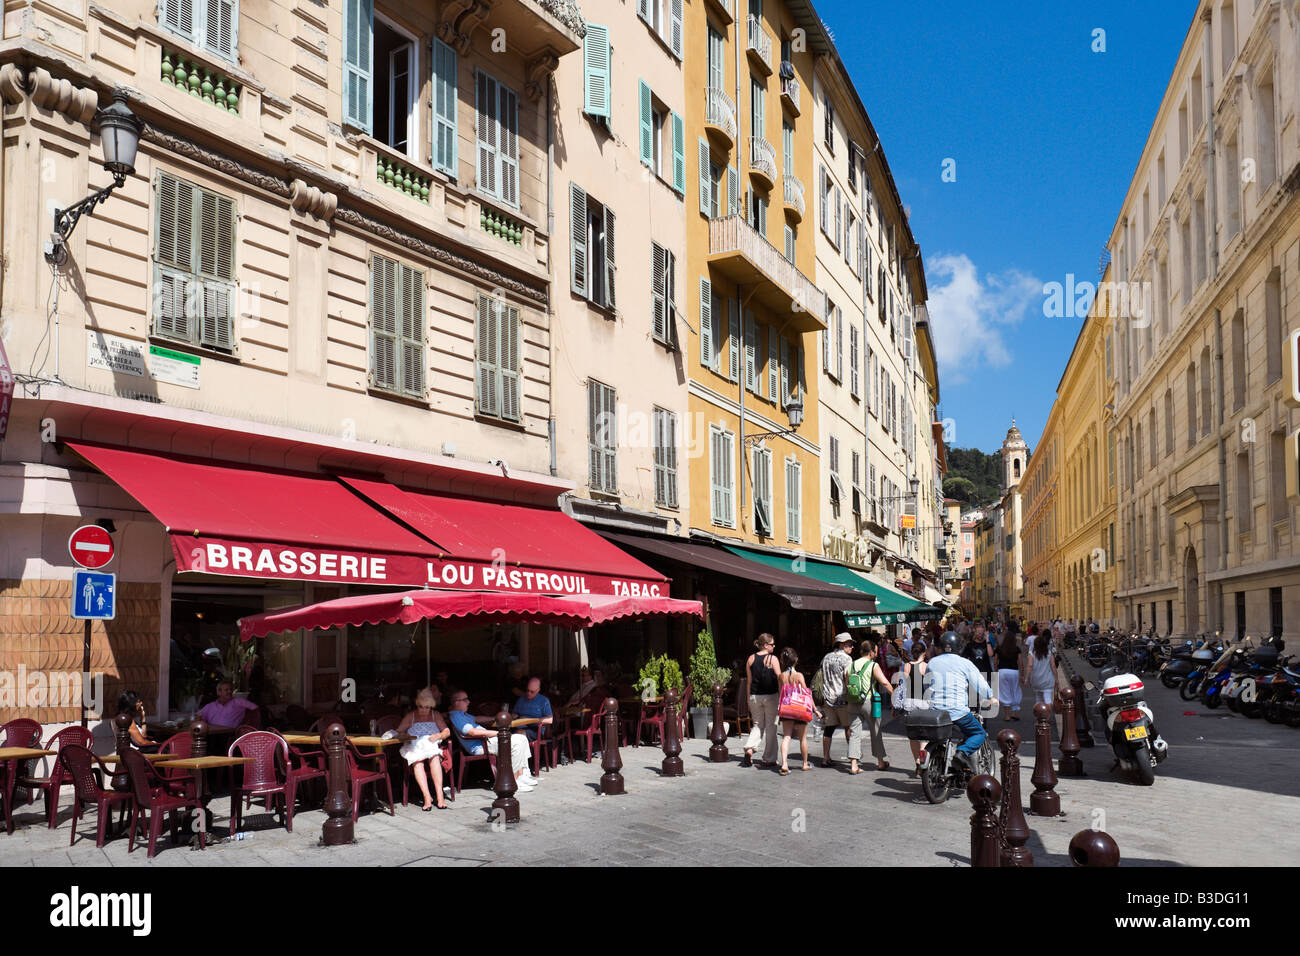 Brasserie and shops in the old town (Vieux Nice), Rue de la Prefecture, Nice, Cote d'Azur, French Riviera, France Stock Photo